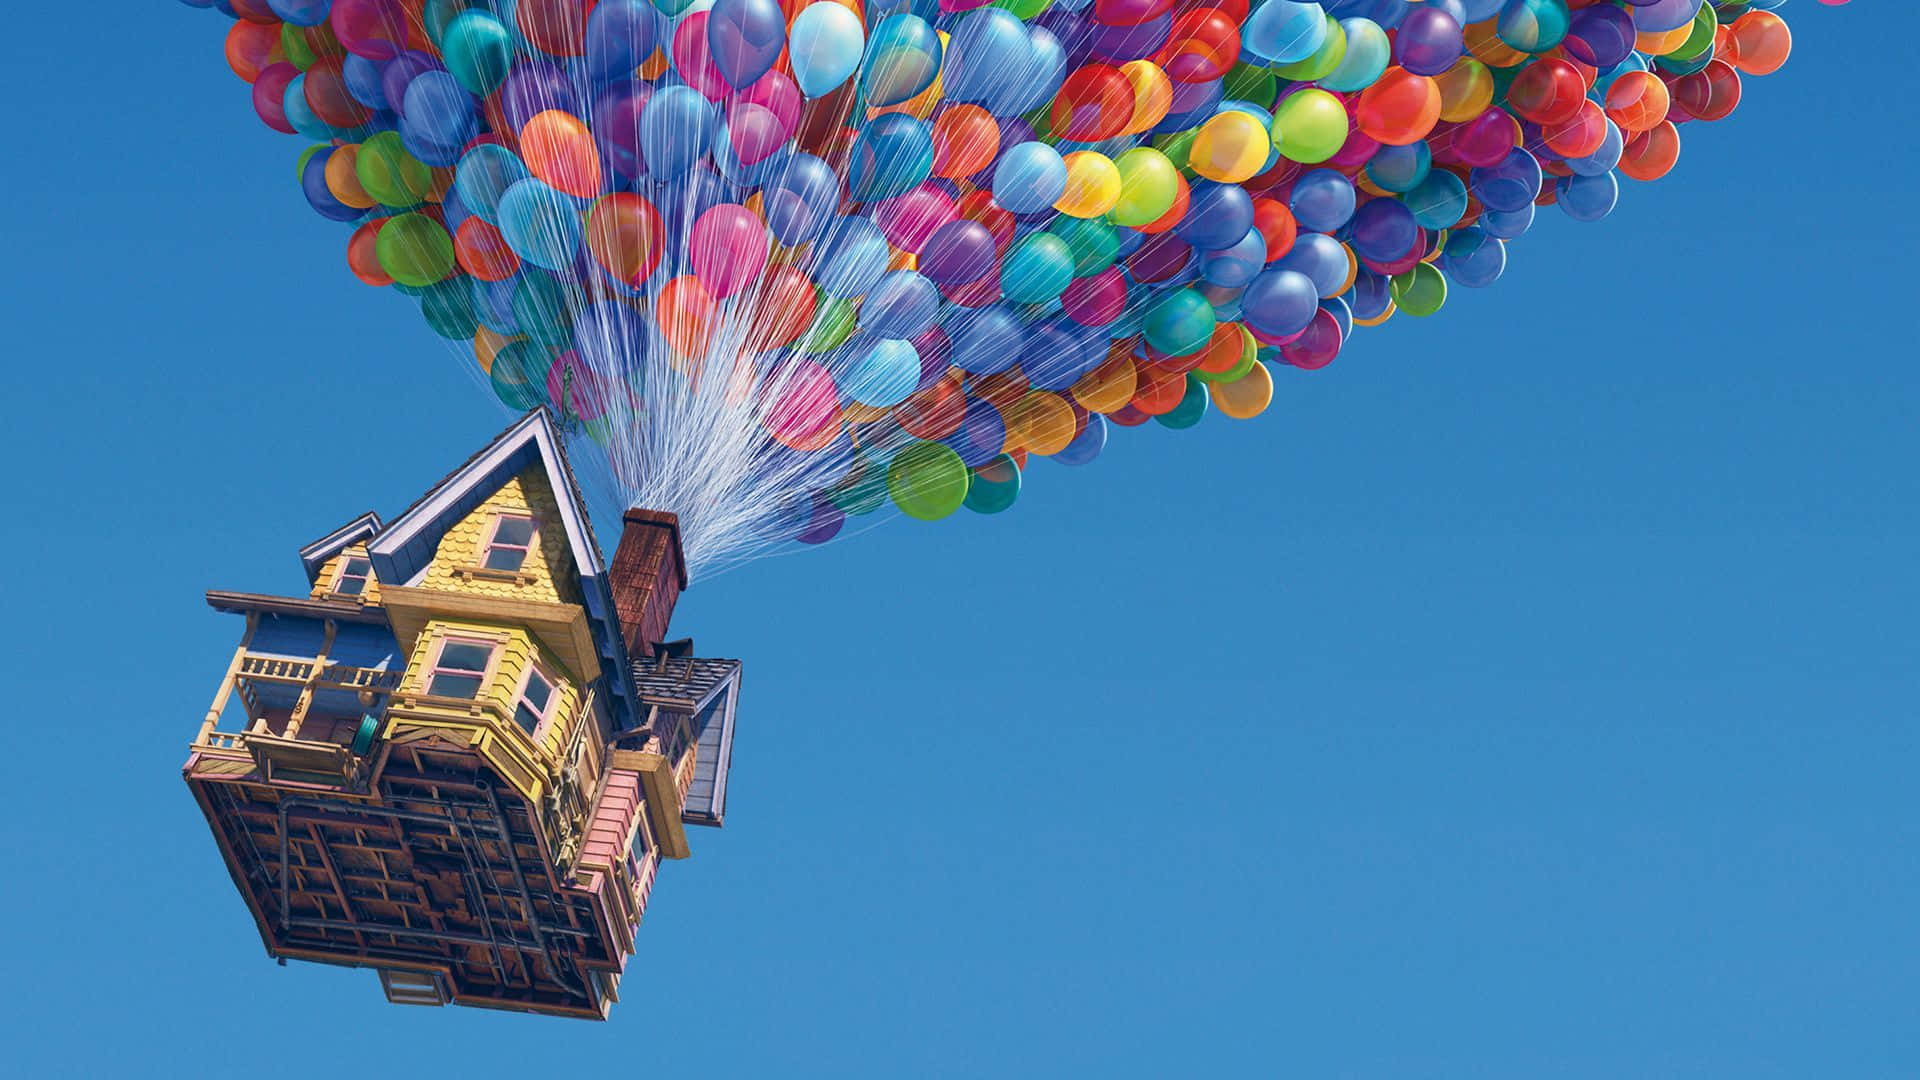 Carl's Floating House On Up Movie Wallpaper